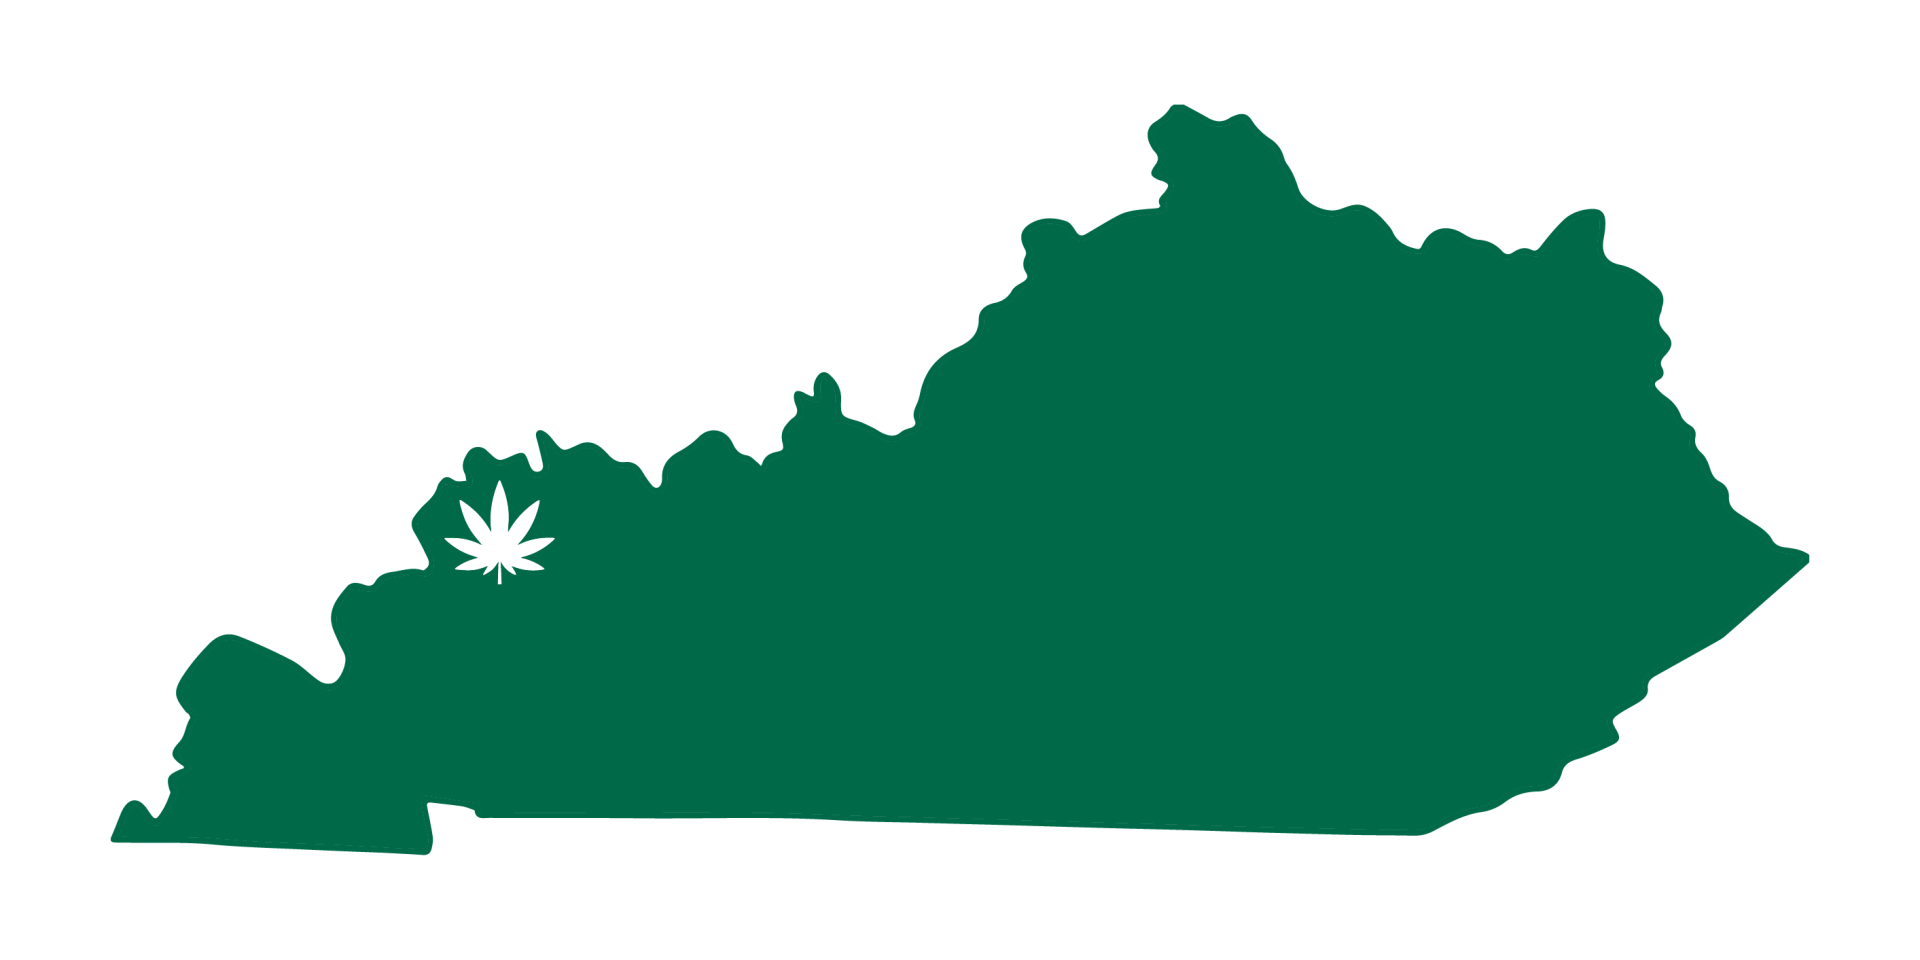 green image of the state of Kentucky with a hemp leaf